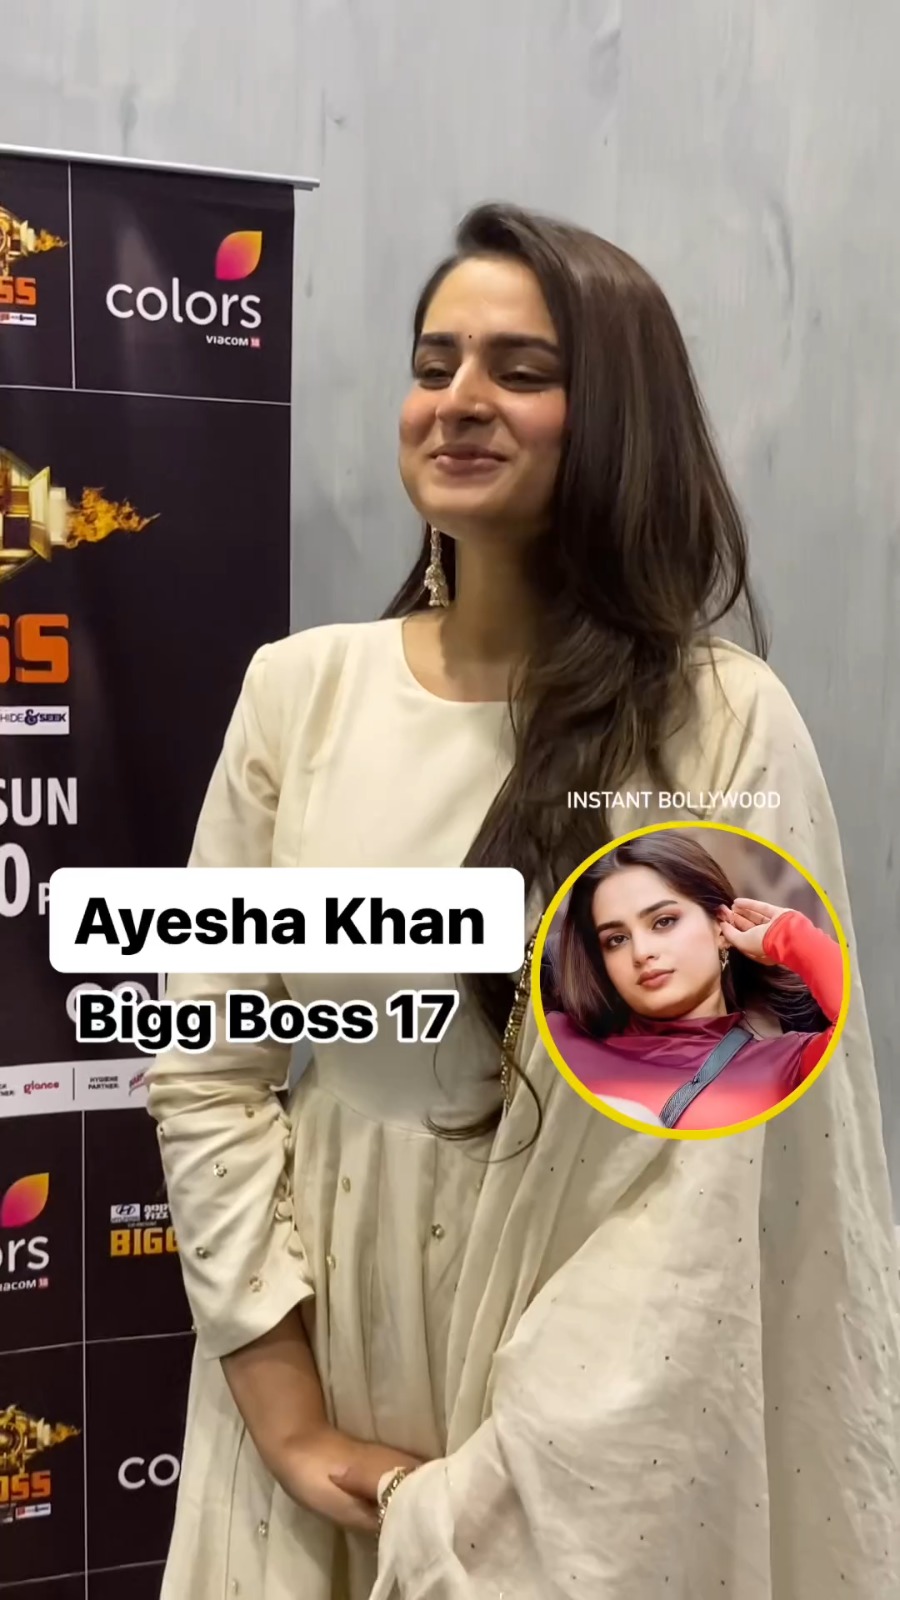 Ayesha Khan speaks with Media after her Bigg Boss Exit 😍